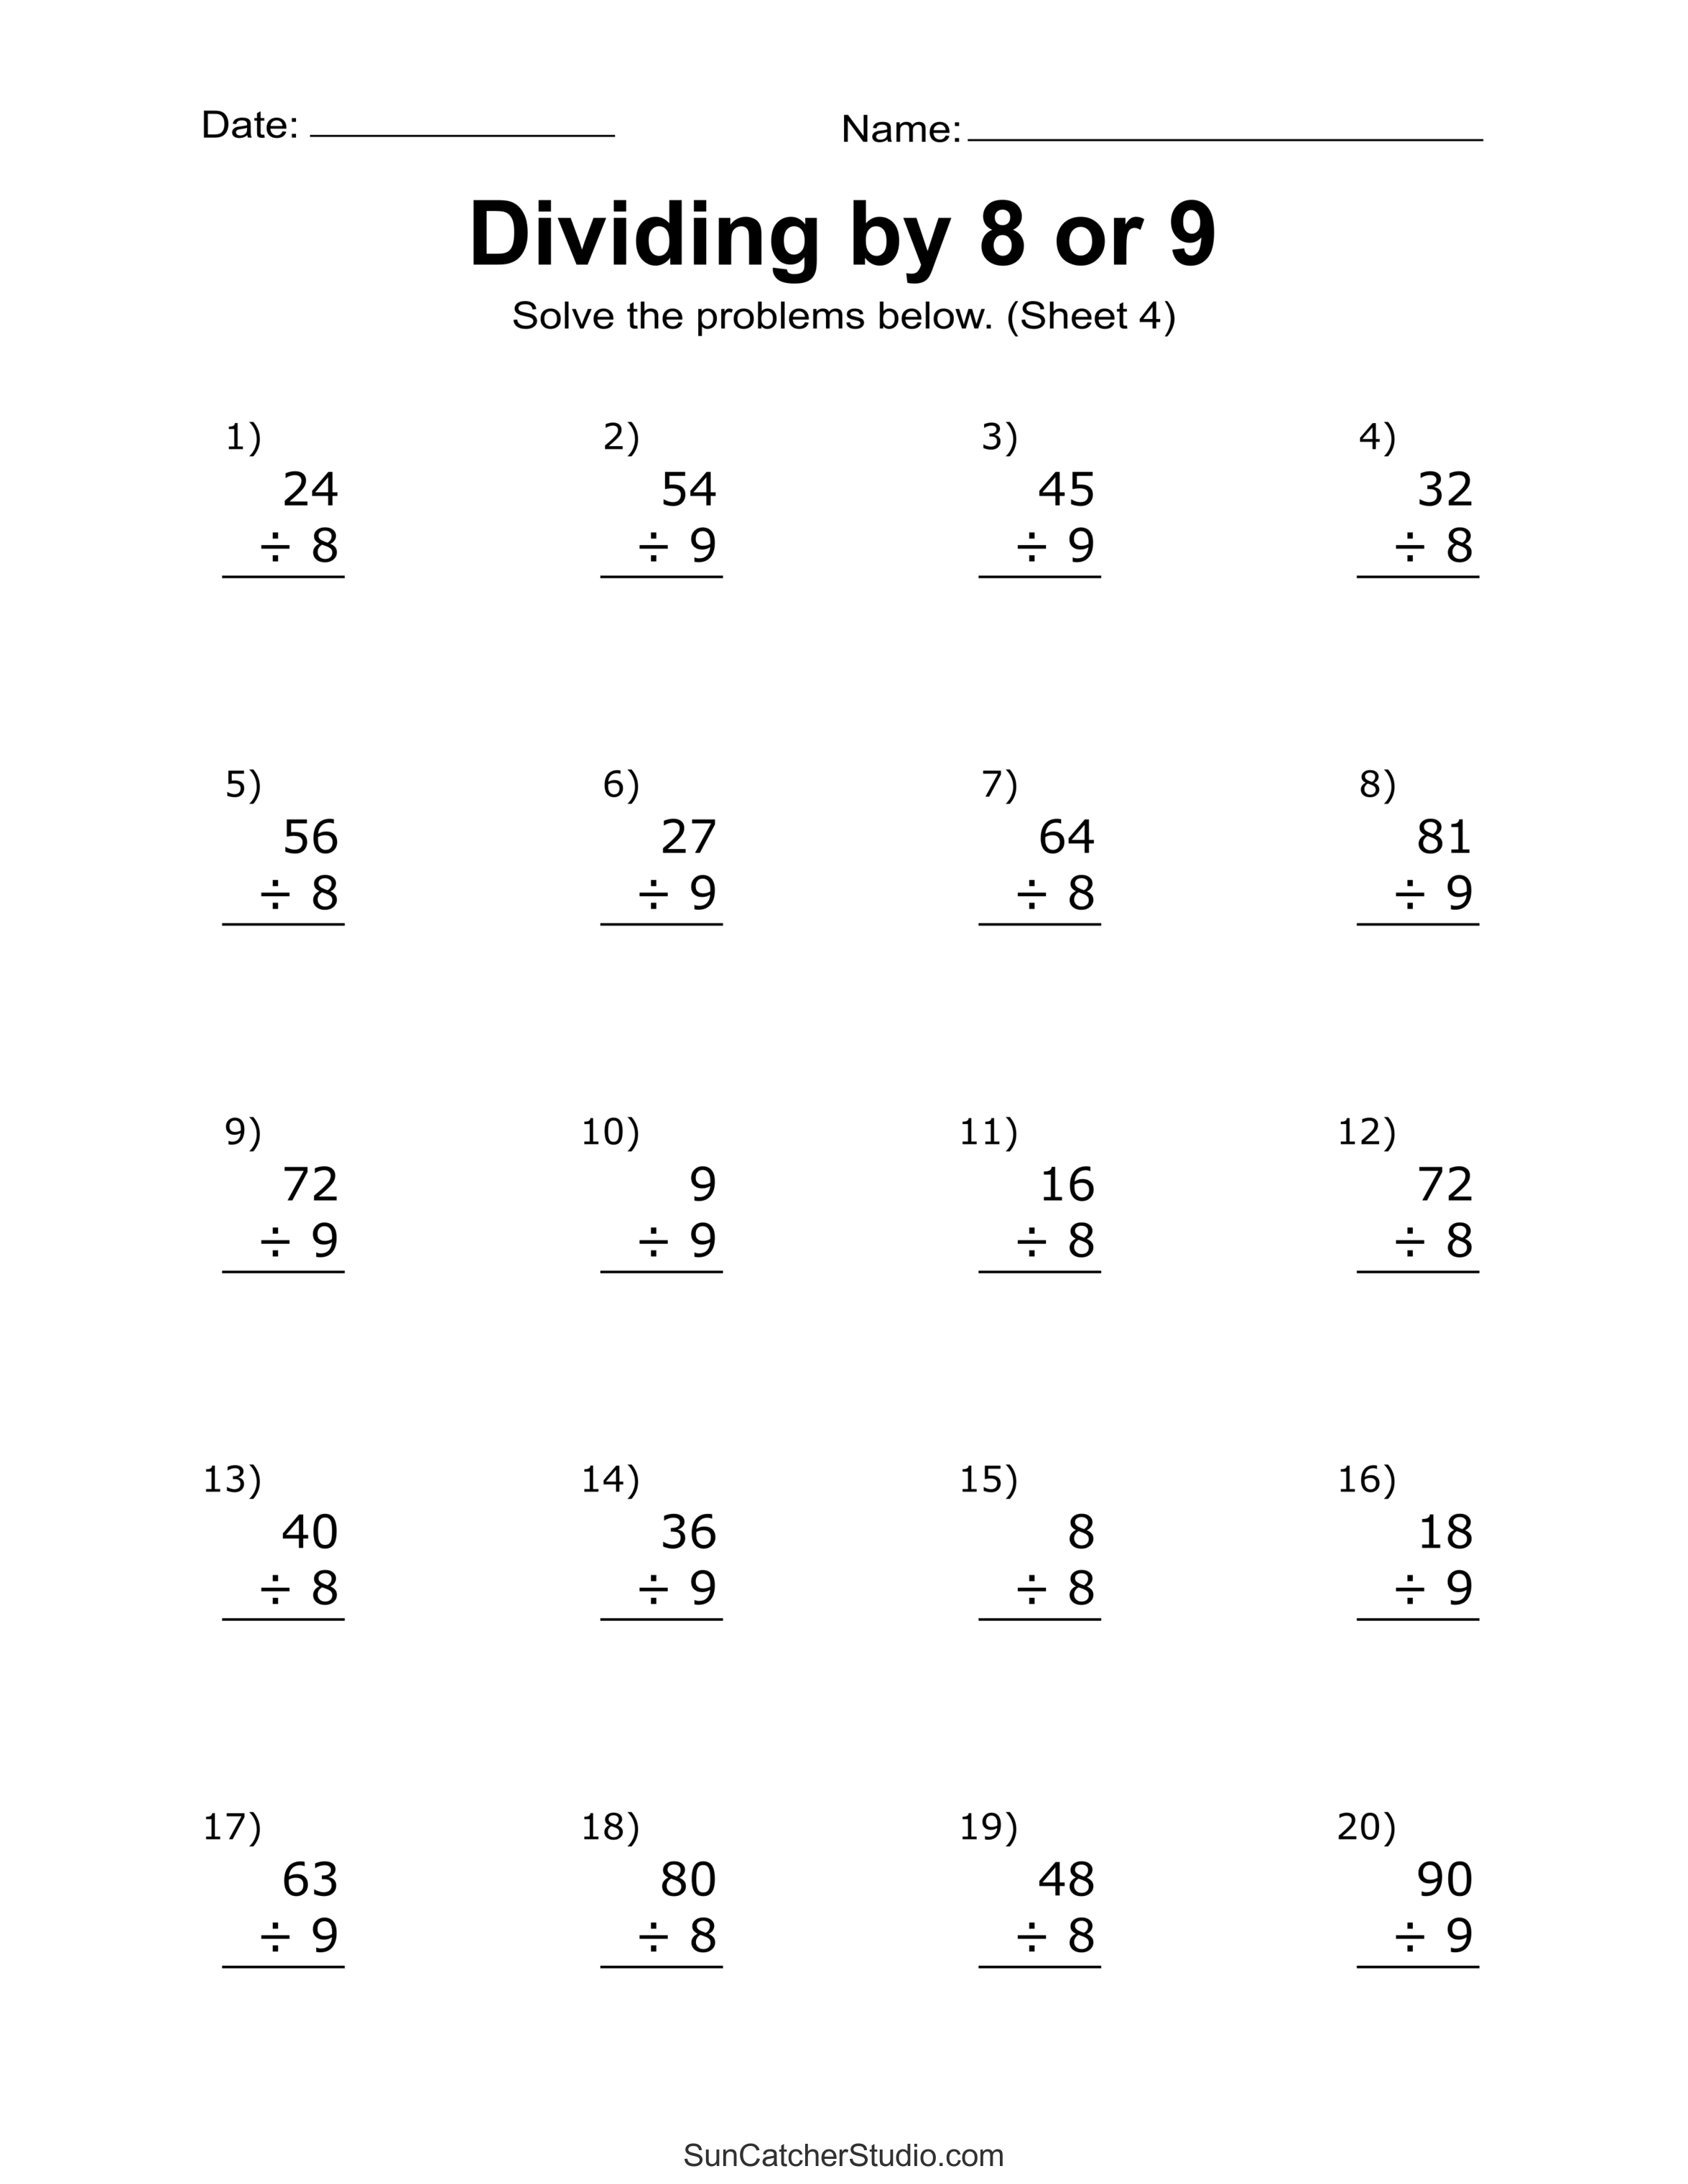 division-worksheets-problems-free-printable-math-drills-diy-projects-patterns-monograms